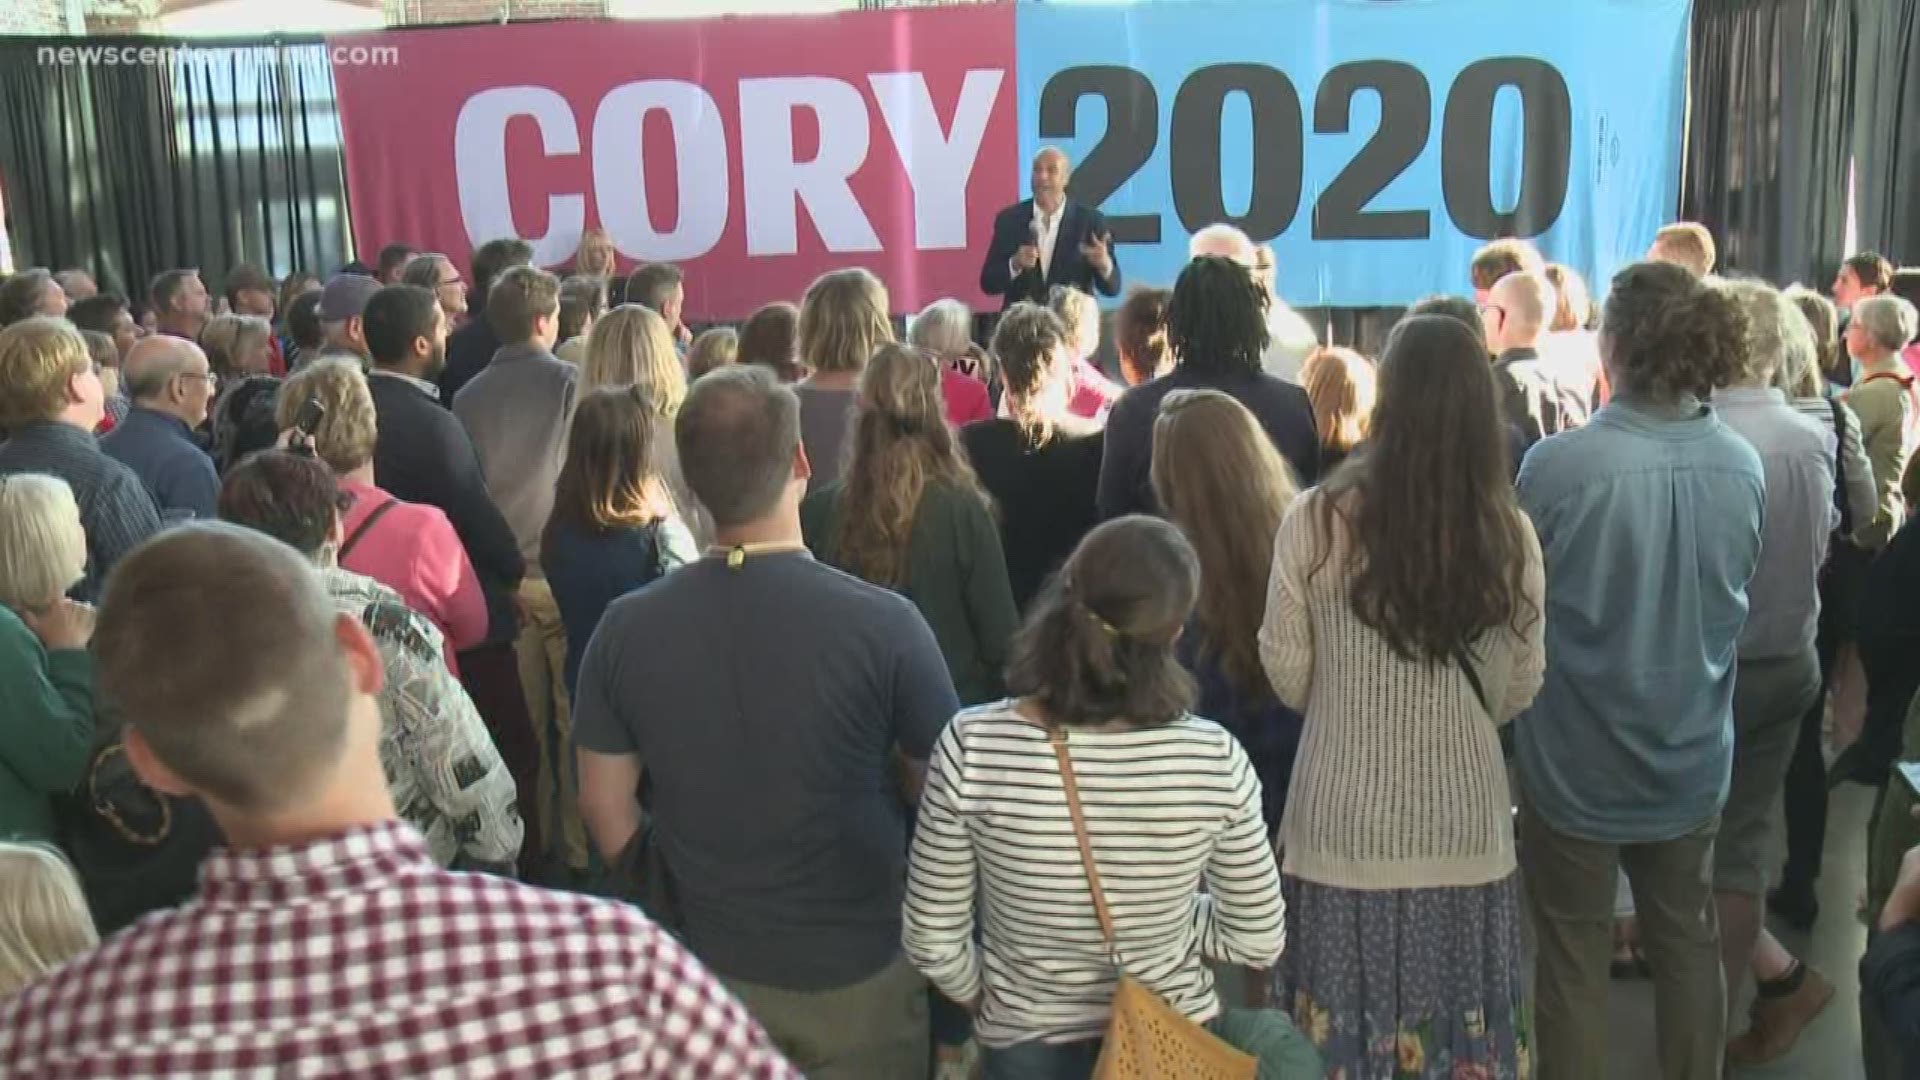 Presidential candidate Cory Booker visits Maine.